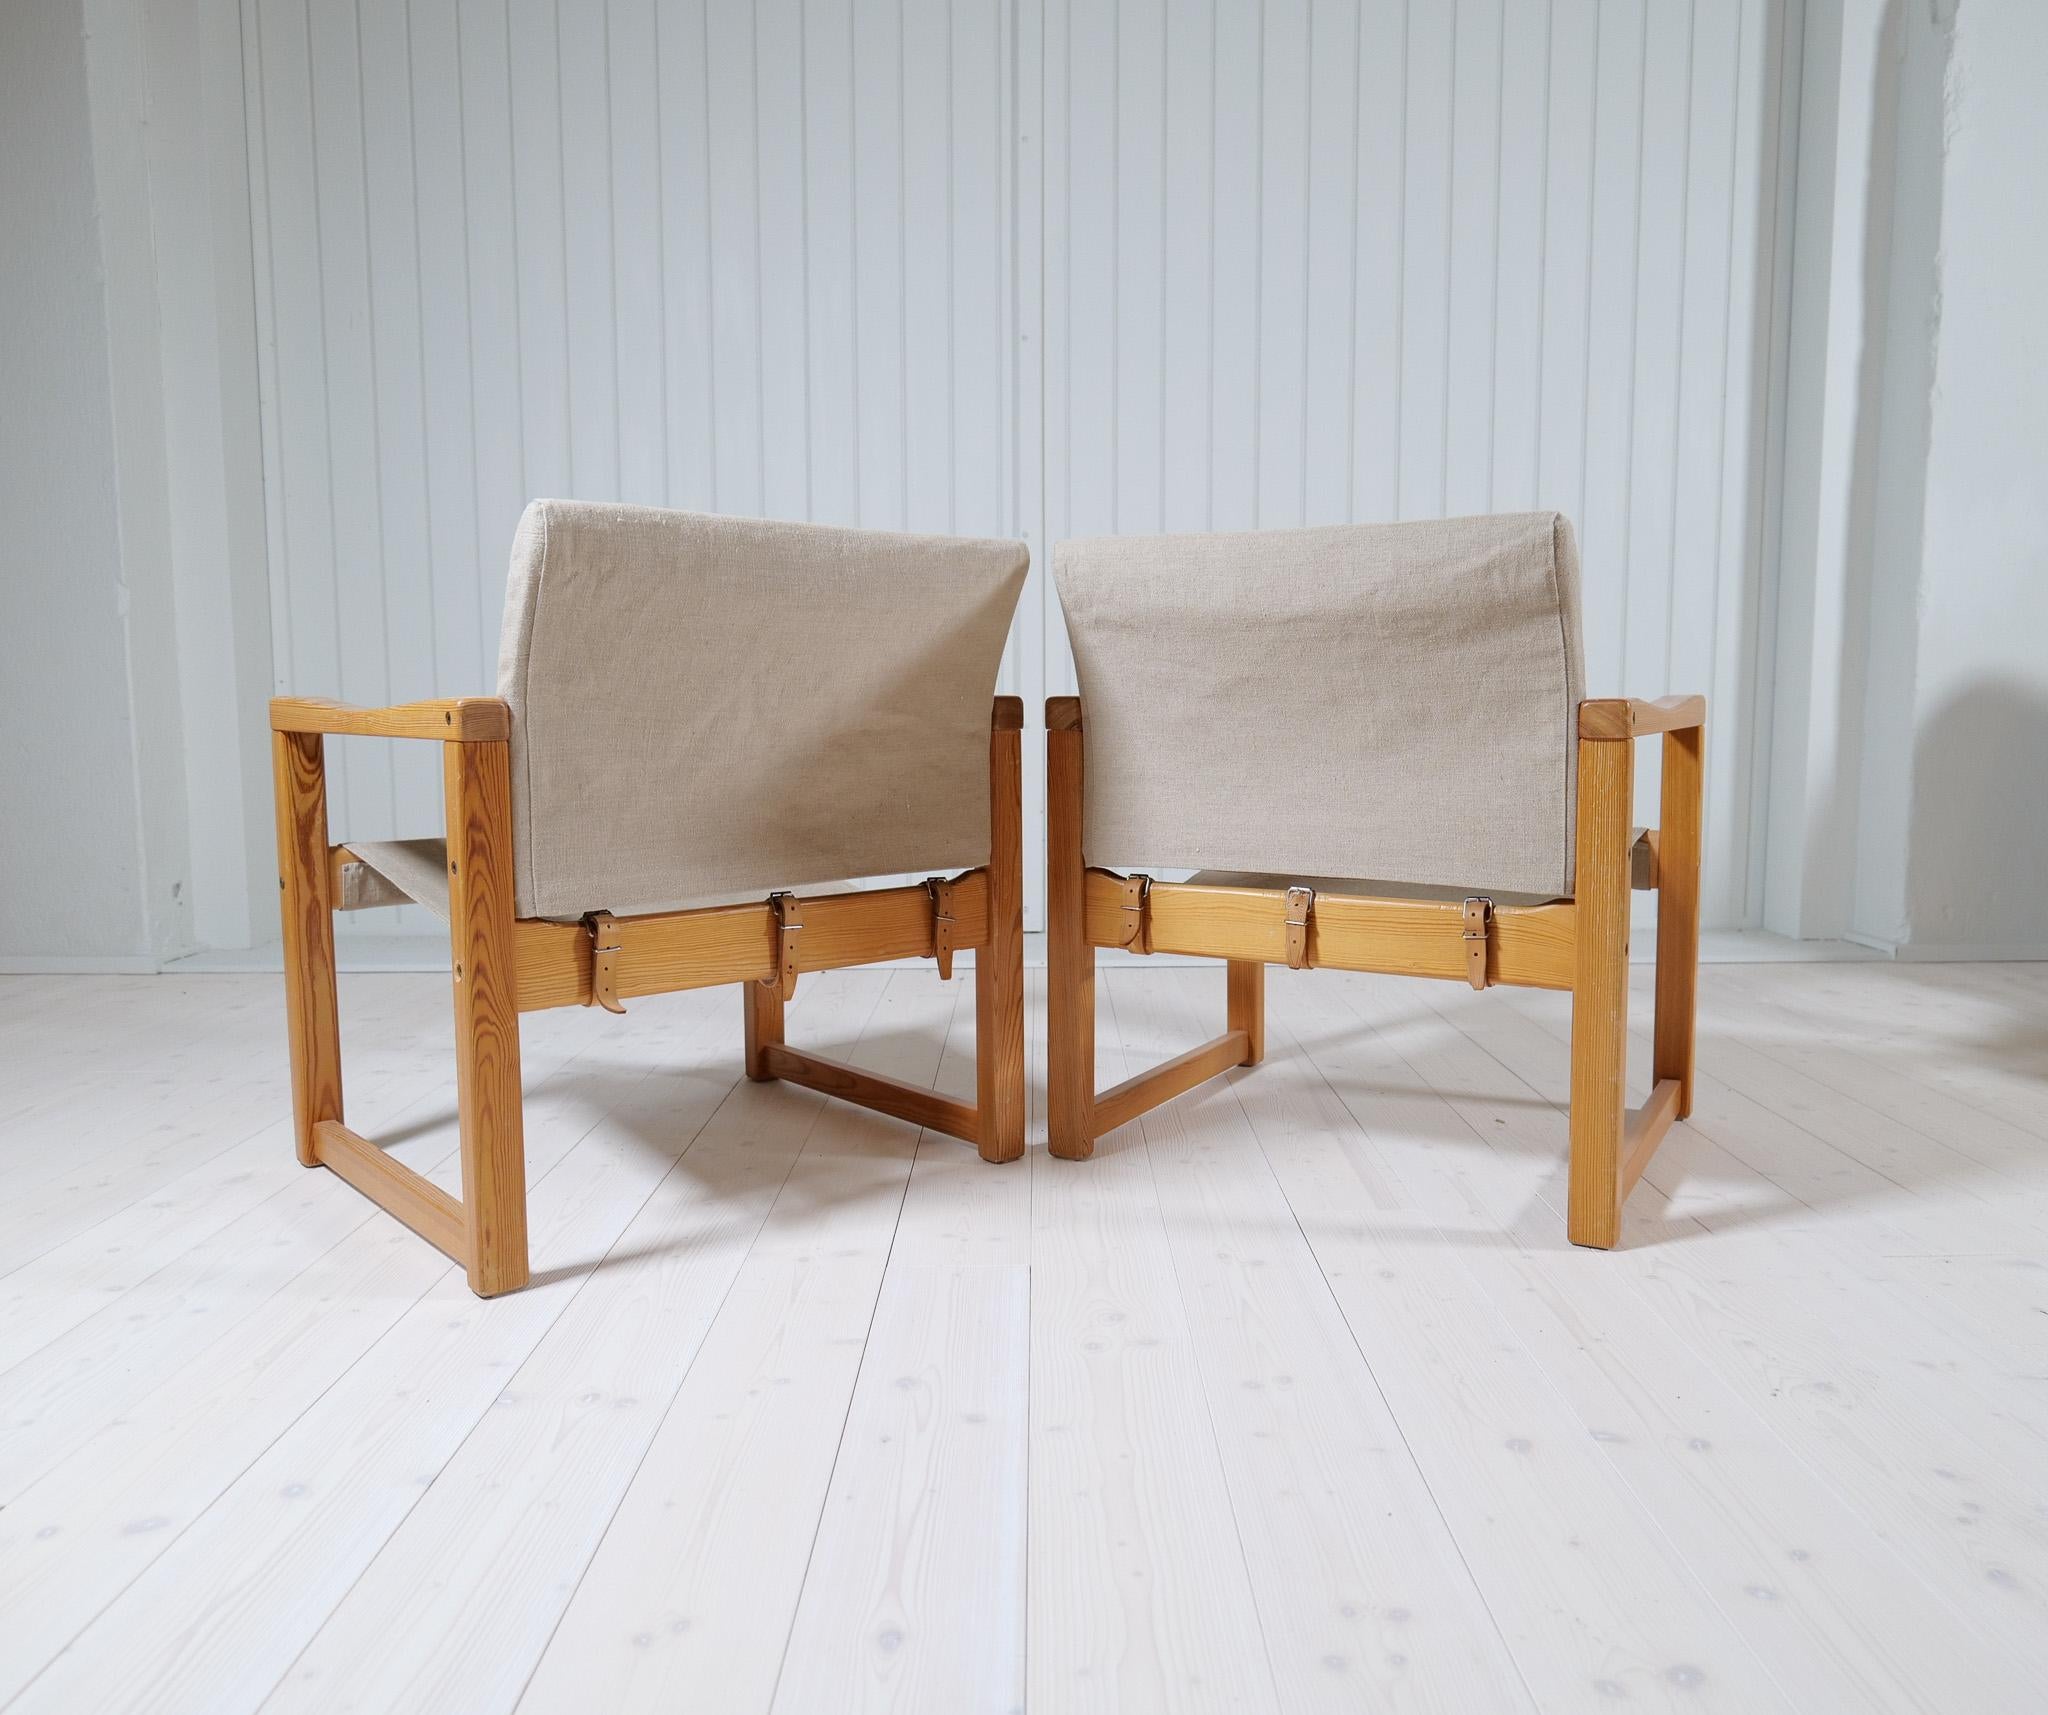 Midcentury Modern Karin Mobring Armchairs Model Diana by Ikea in Sweden, 1970s For Sale 6